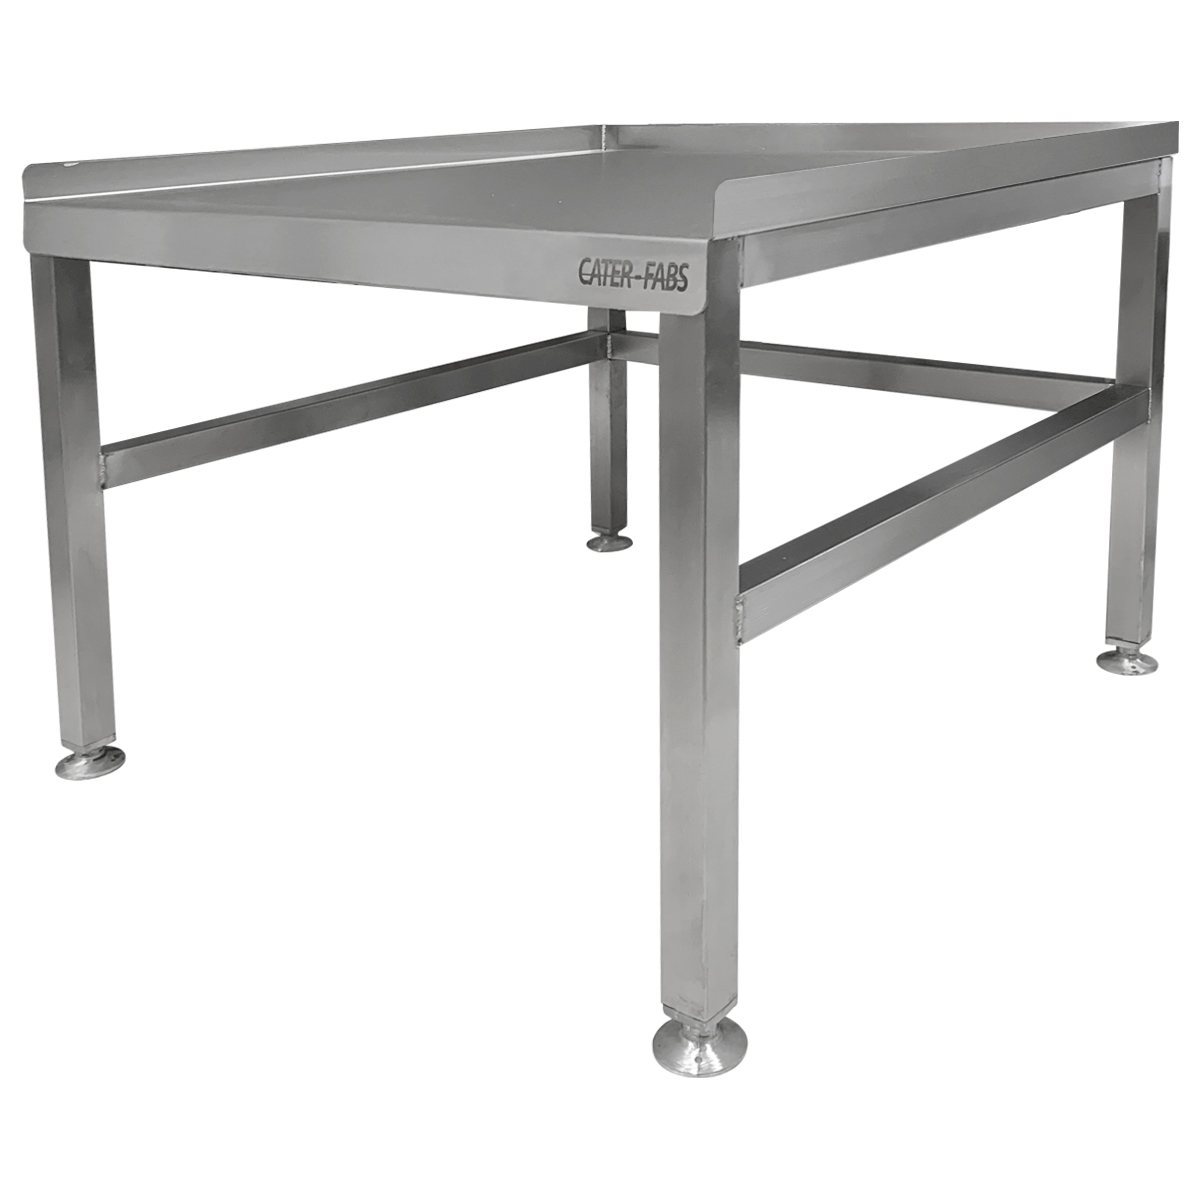 Cater-Fabs Stainless Steel Equipment Stand W605 x D640 x H450mm